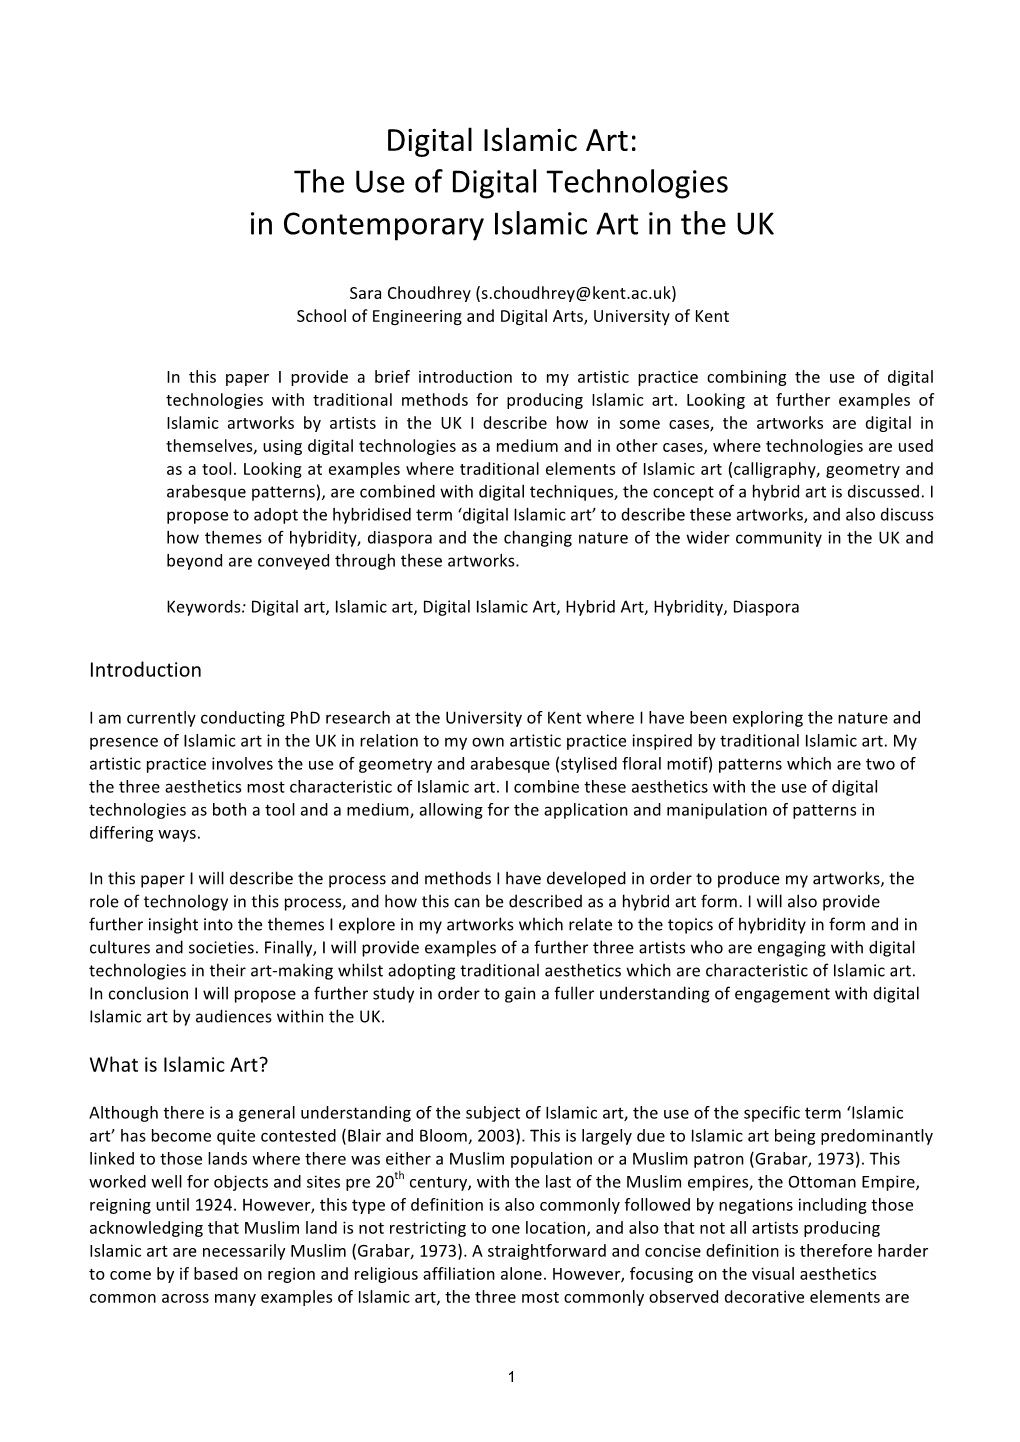 The Use of Digital Technologies in Contemporary Islamic Art in the UK